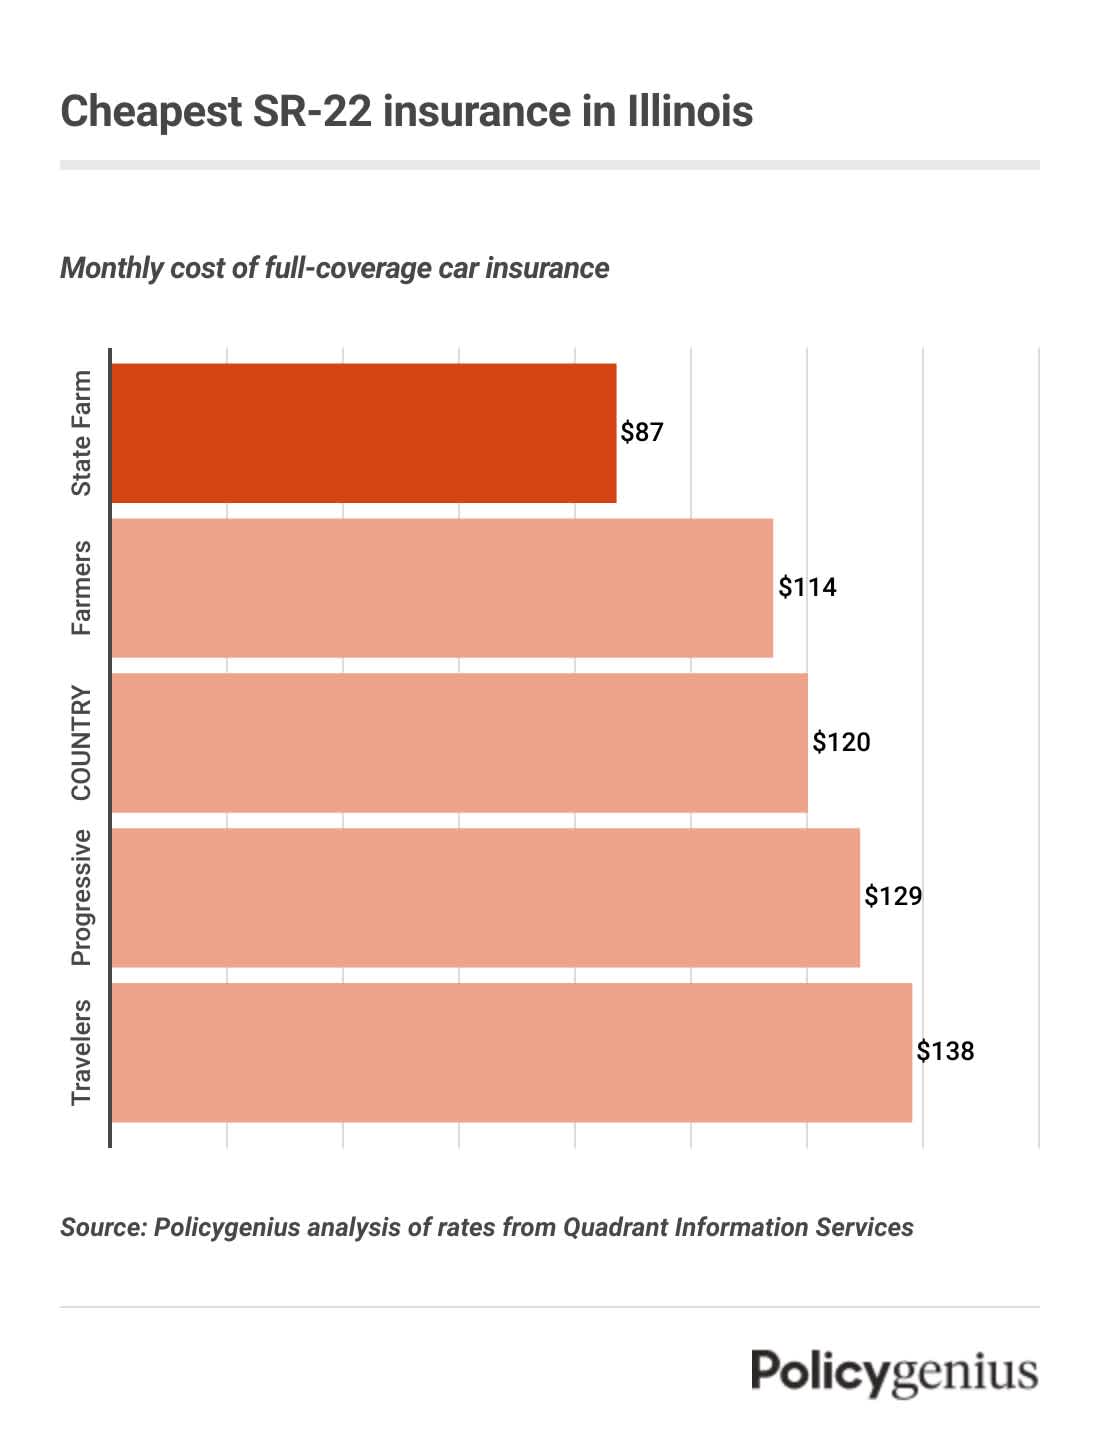 A bar graph showing the cheapest insurance companies for drivers with an SR-22. The cheapest company for SR-22 insurance in Illinois is State Farm.